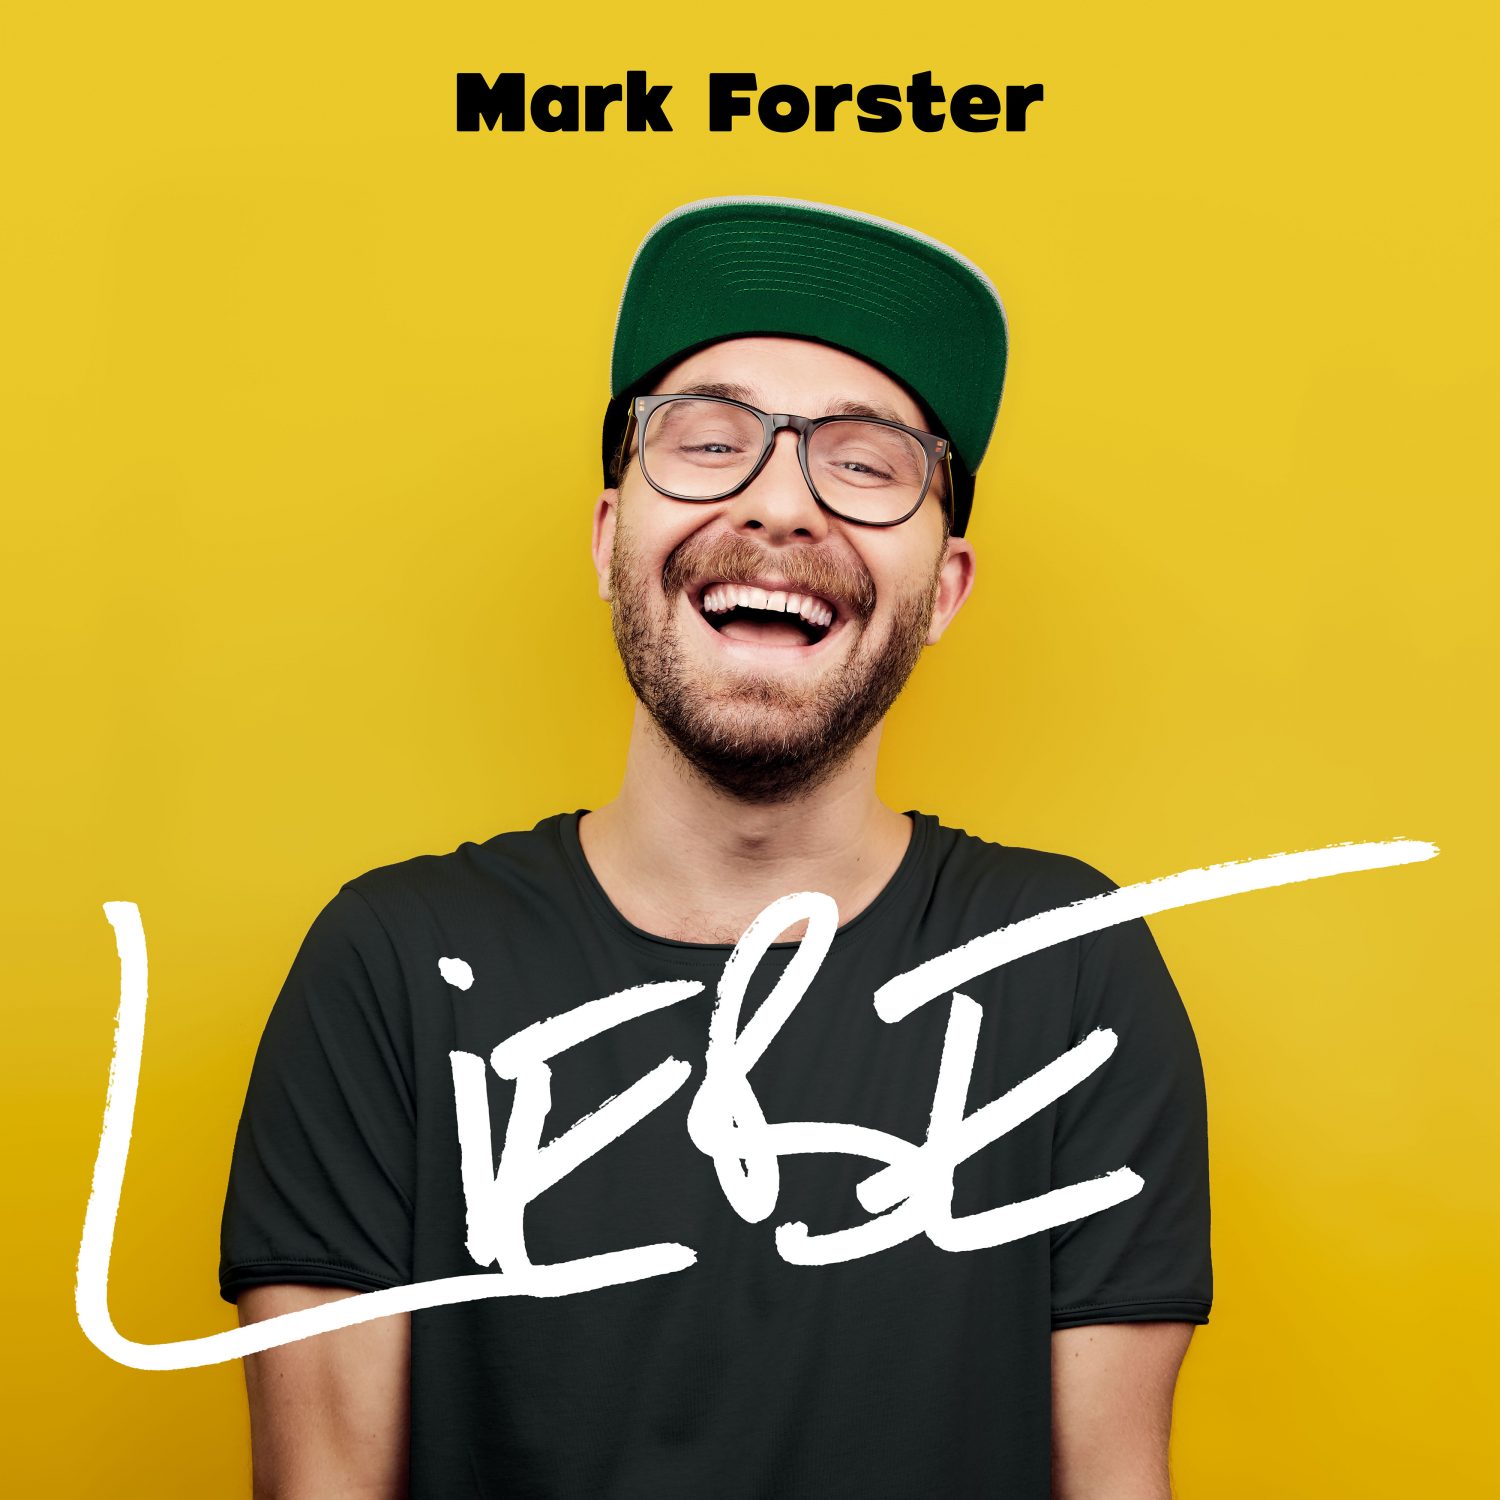 Mark Forster - “Liebe“ (Four Music/Sony Music) 